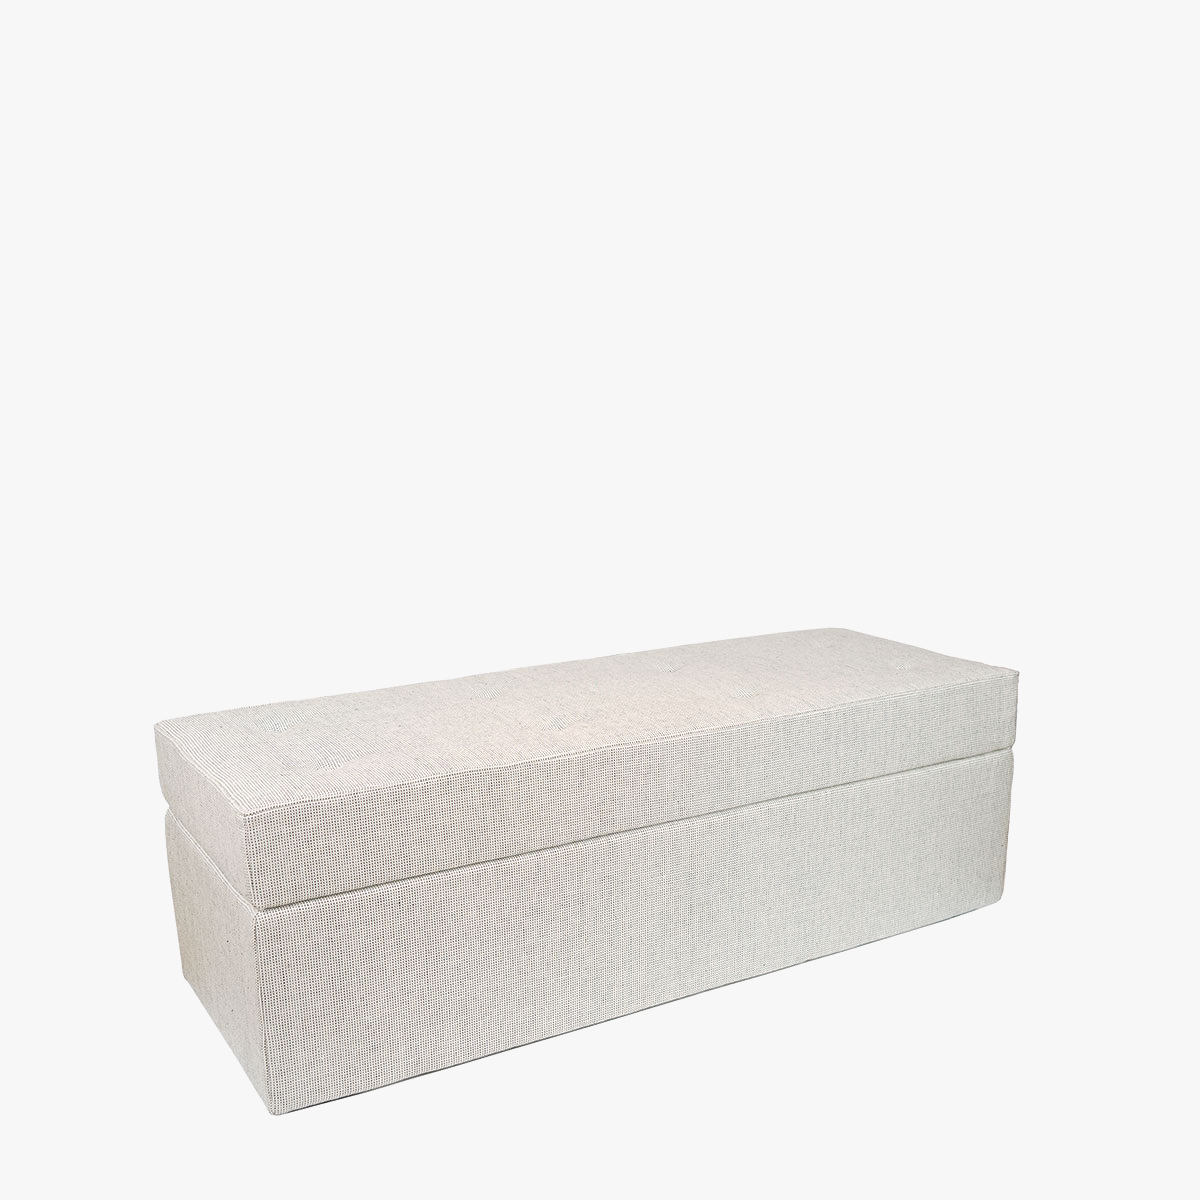 Storage Bench Seat Jacob, Model stretched or covered - Dandy fabric / Wood - image 2